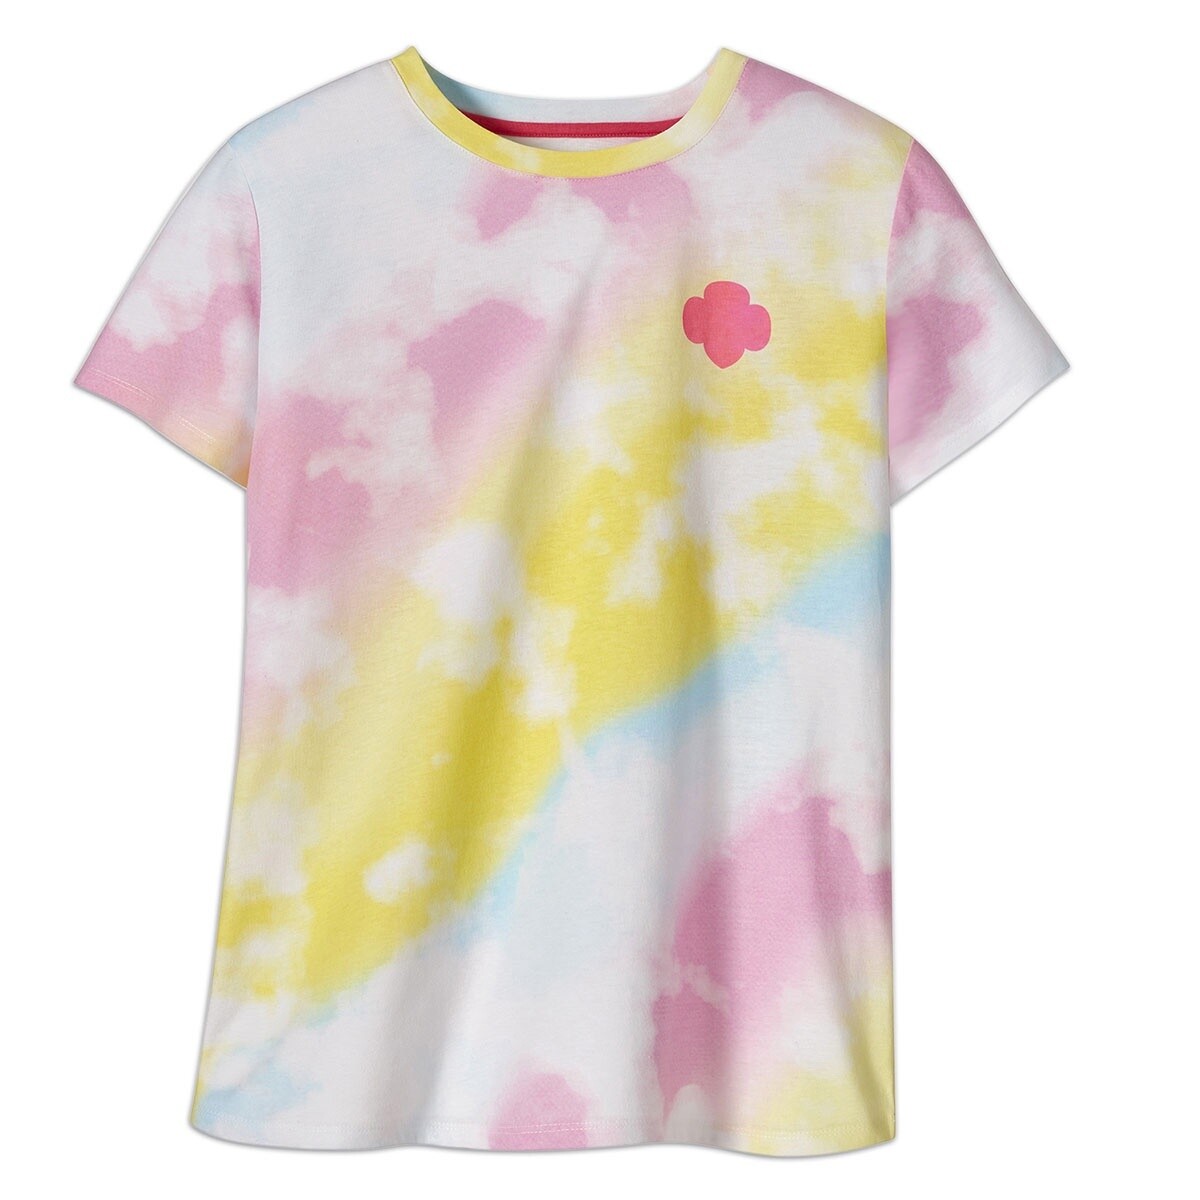 Not Waiting For Permission Tie Dye T-Shirt — Women's